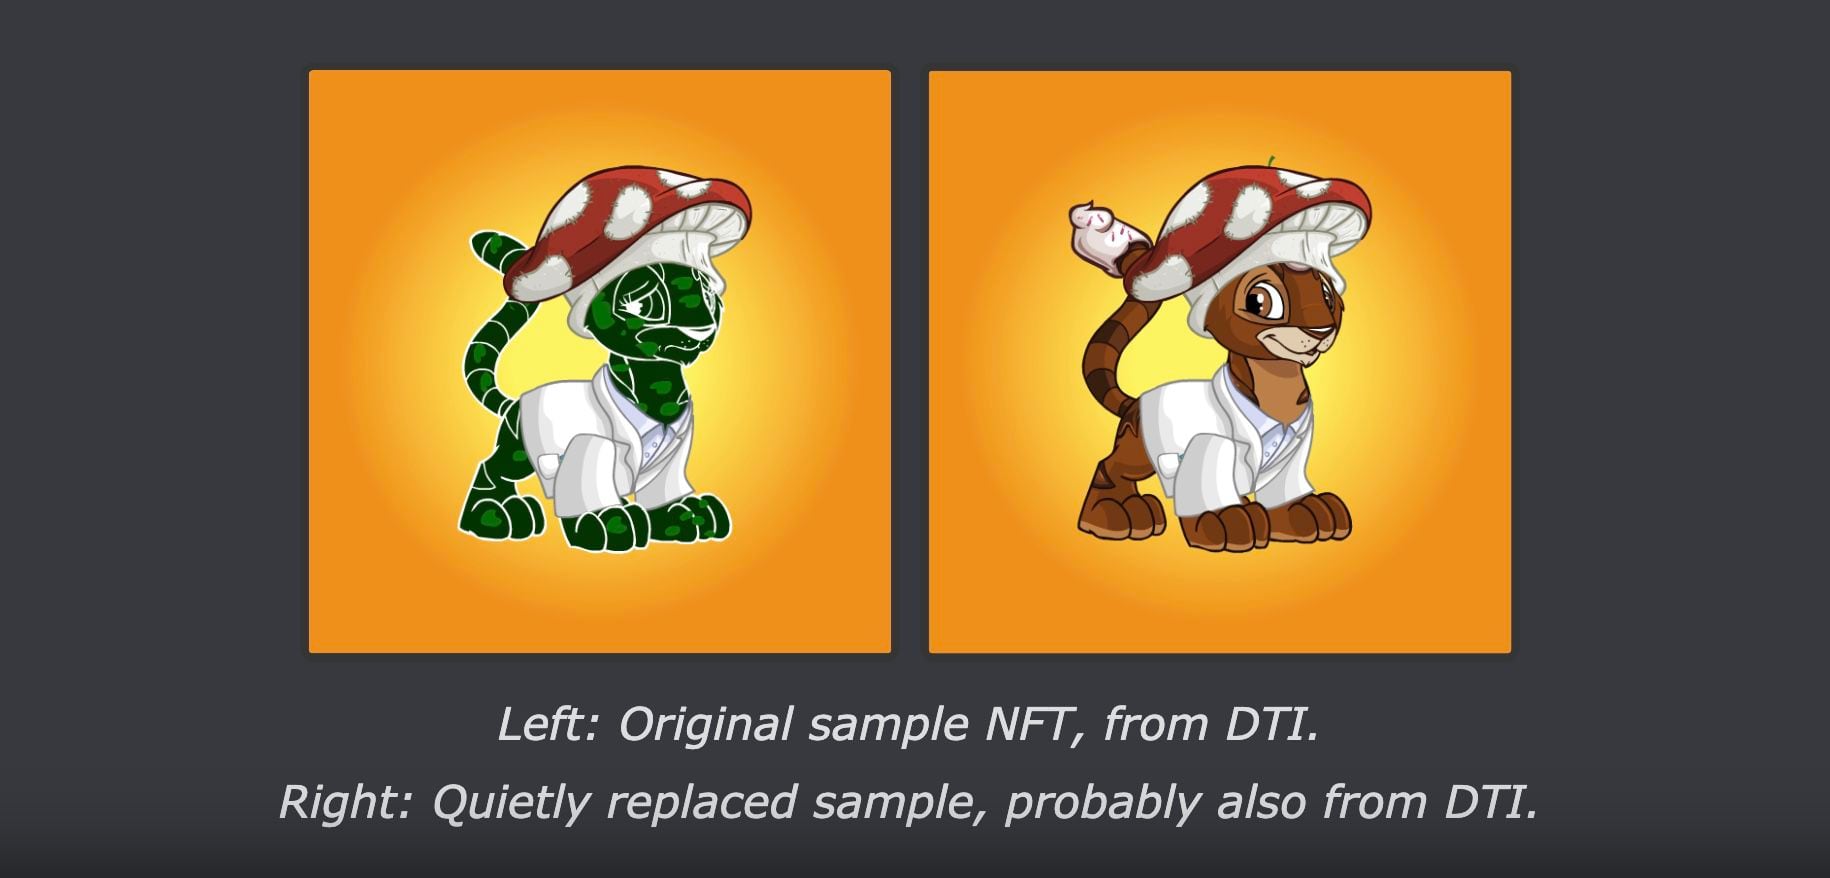 Neopets Pitched a Metaverse Pivot. Fans Balked